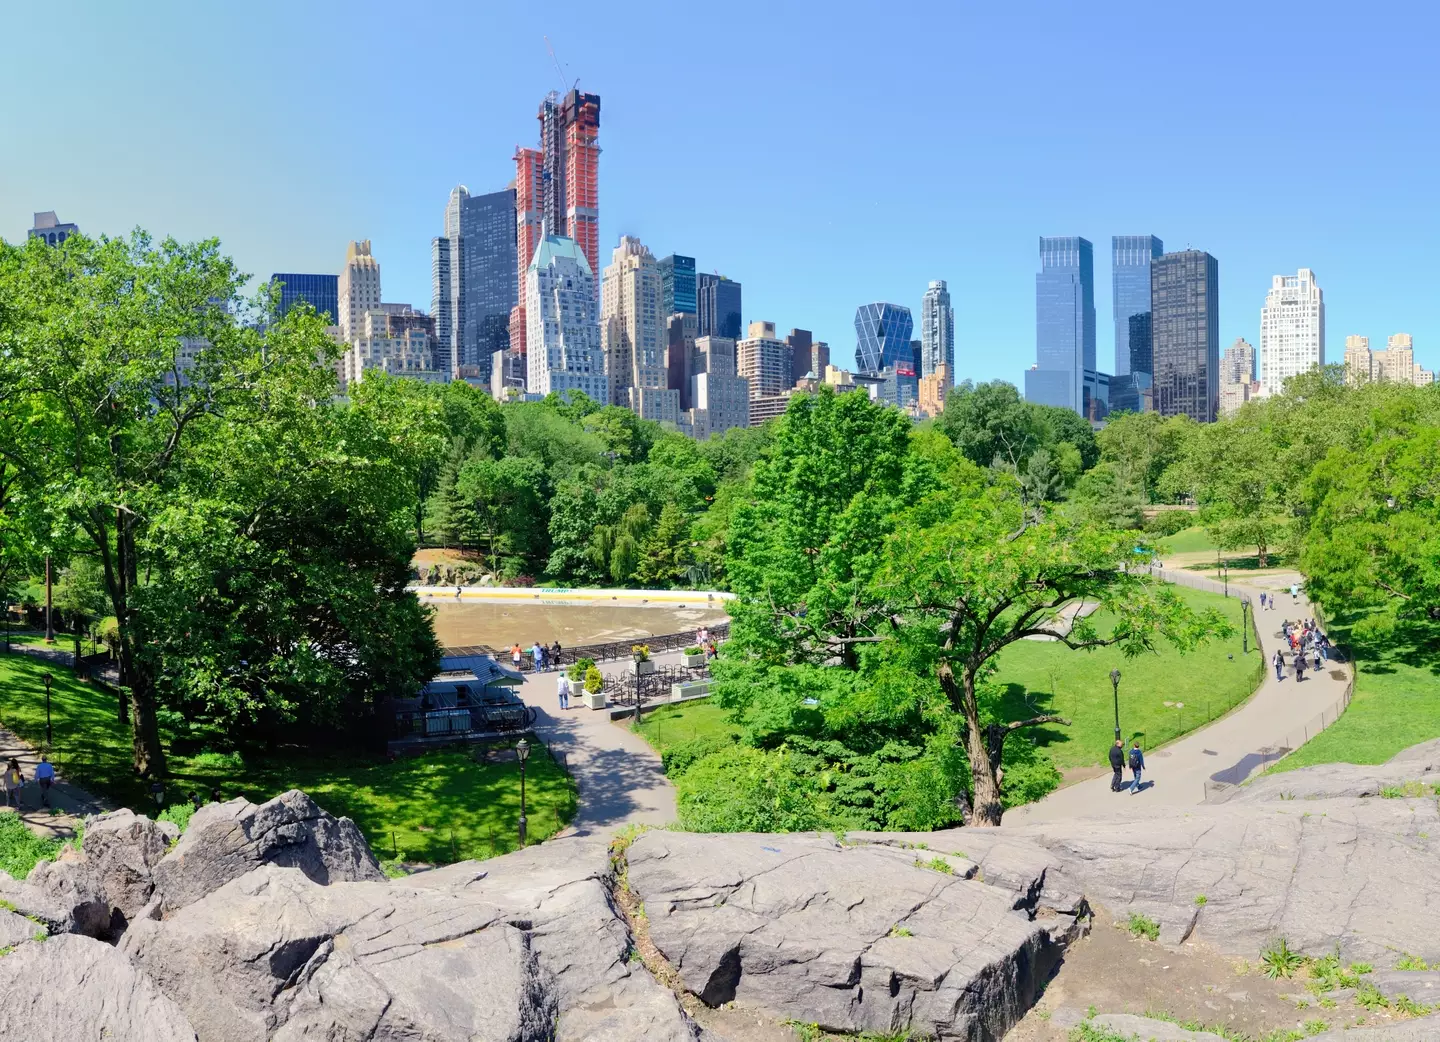 Central Park was officially established in 1853.